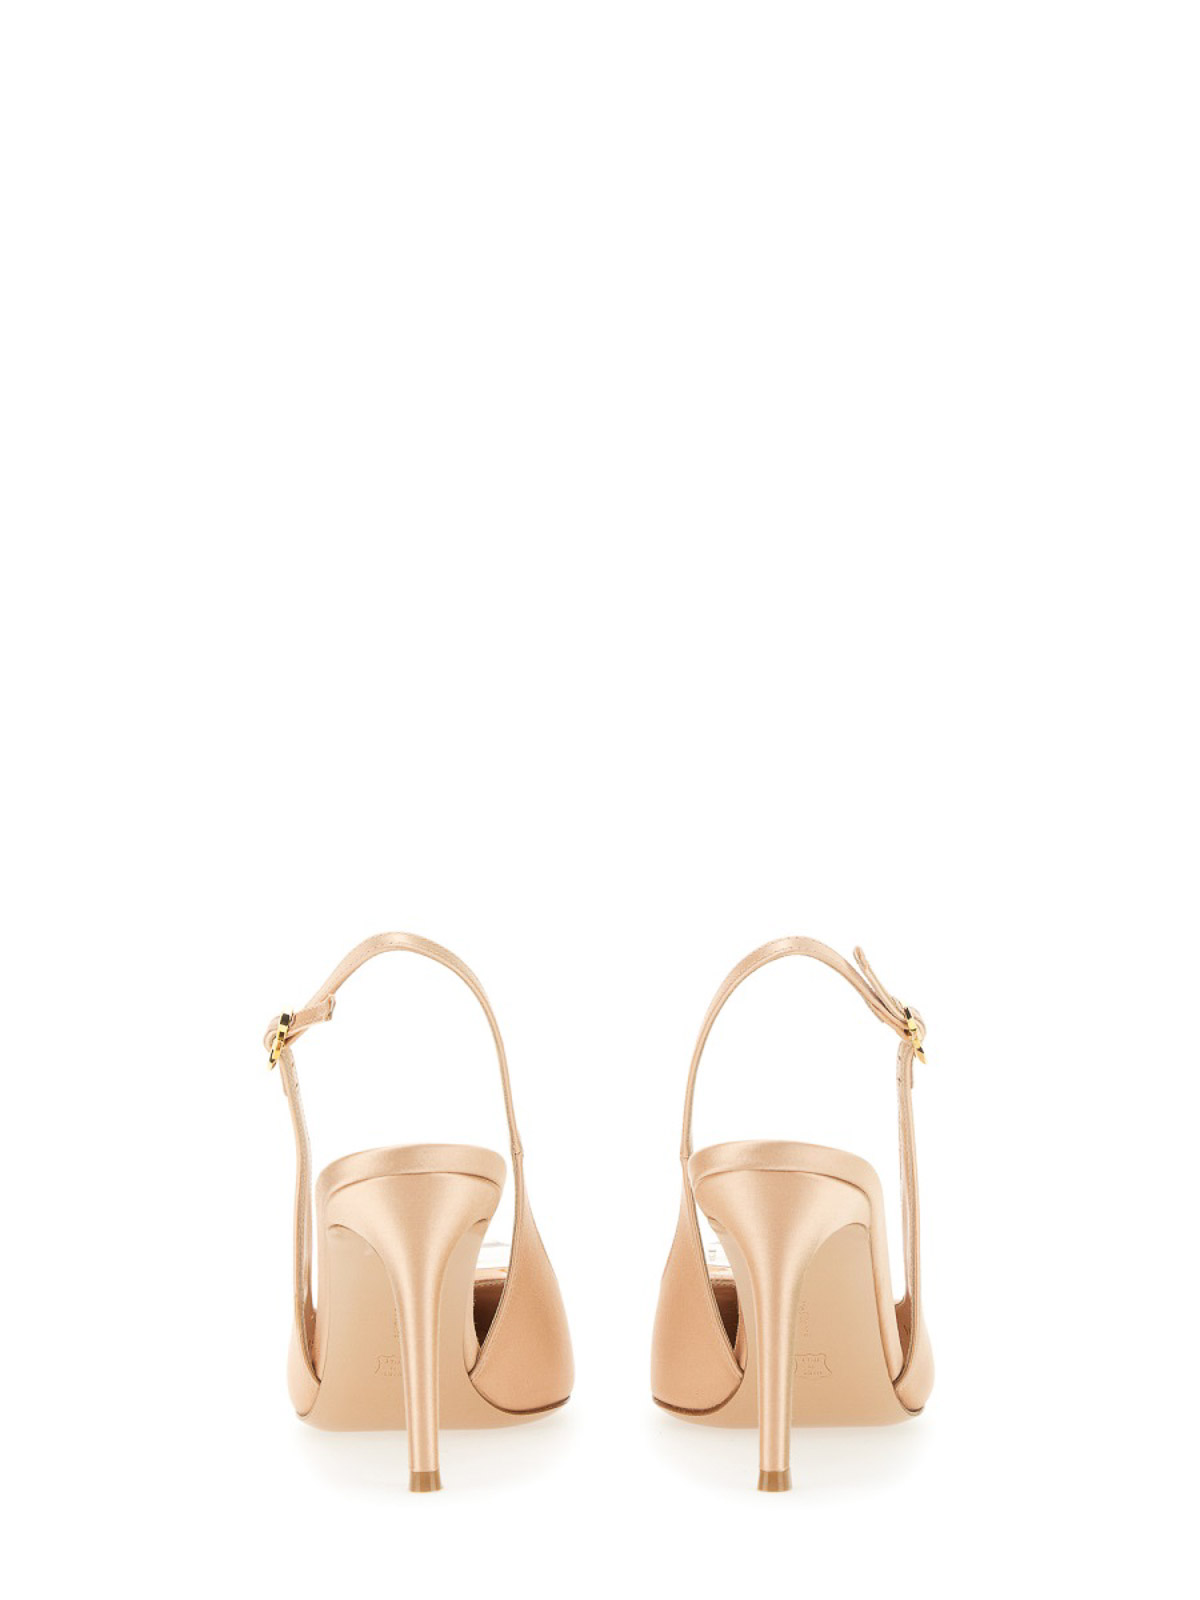 Shop Gianvito Rossi Jaipur Sandals In Light Pink